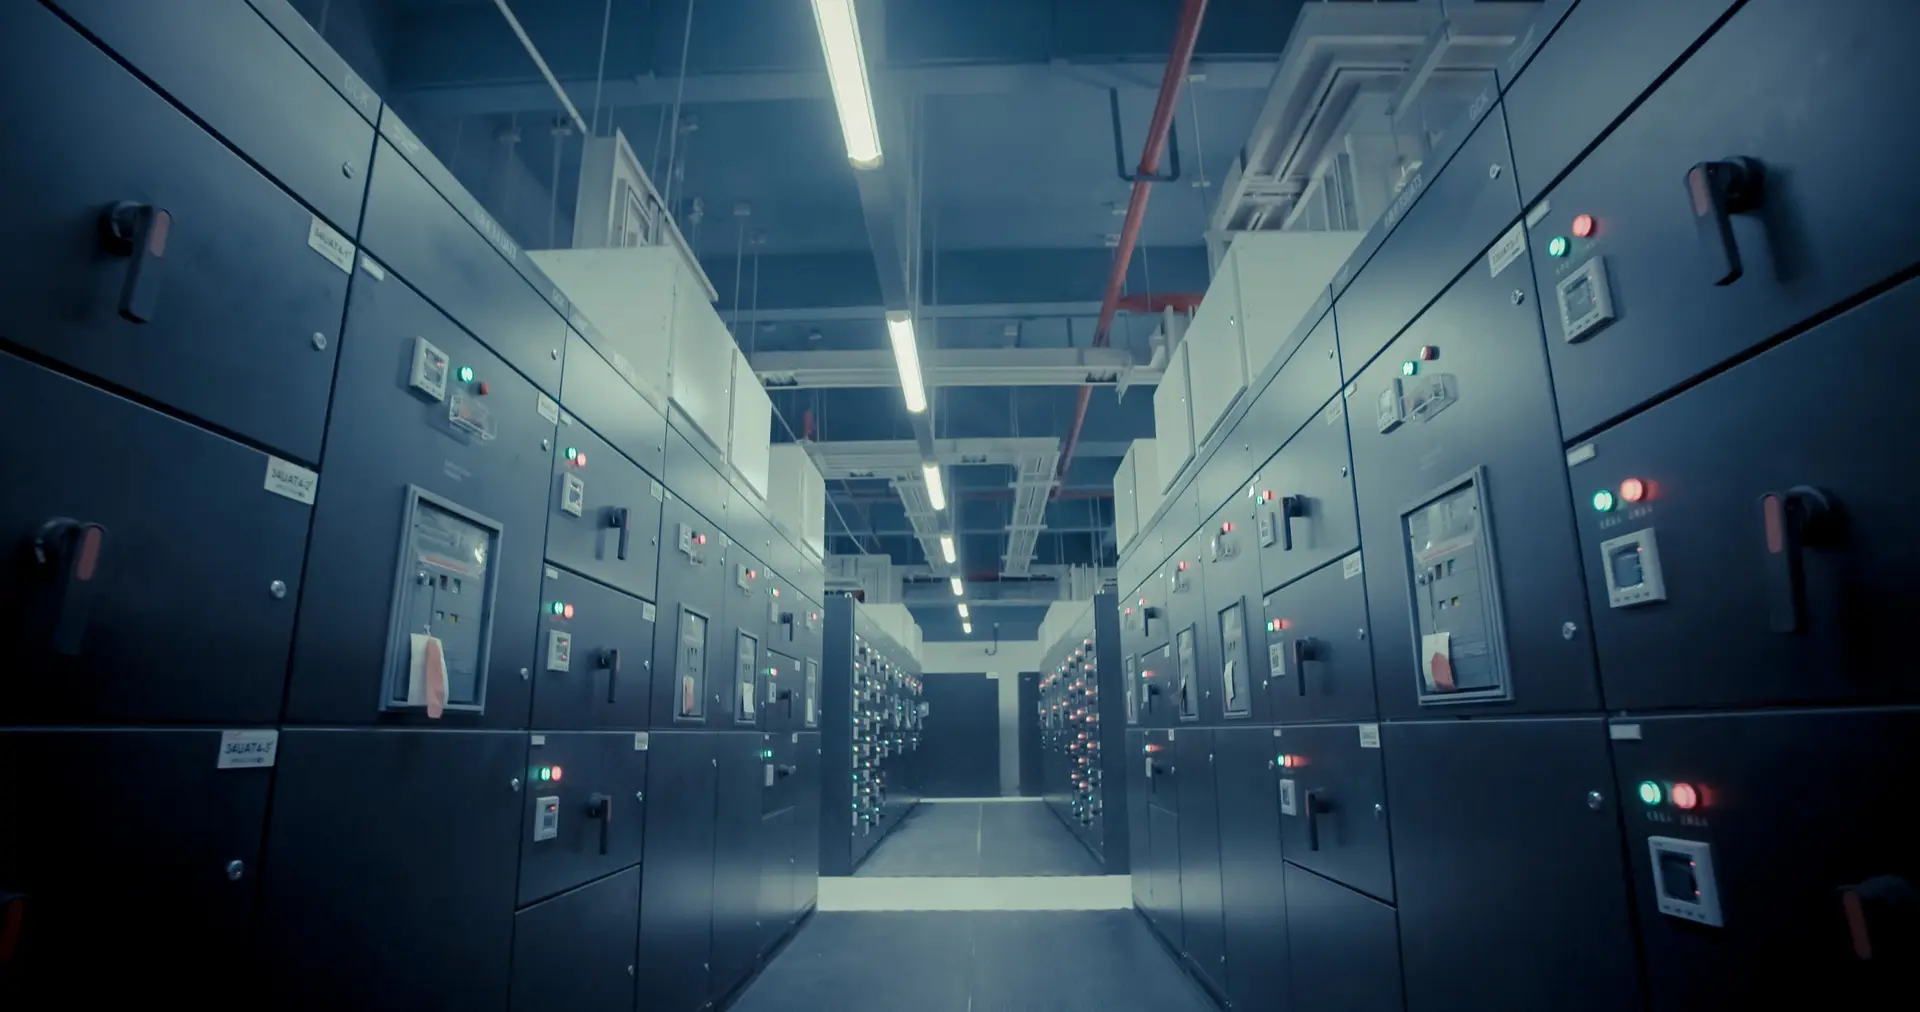 An image depicting a primary server room filled with rows of servers, symbolizing ObjectStyle's DevOps Consulting Services.